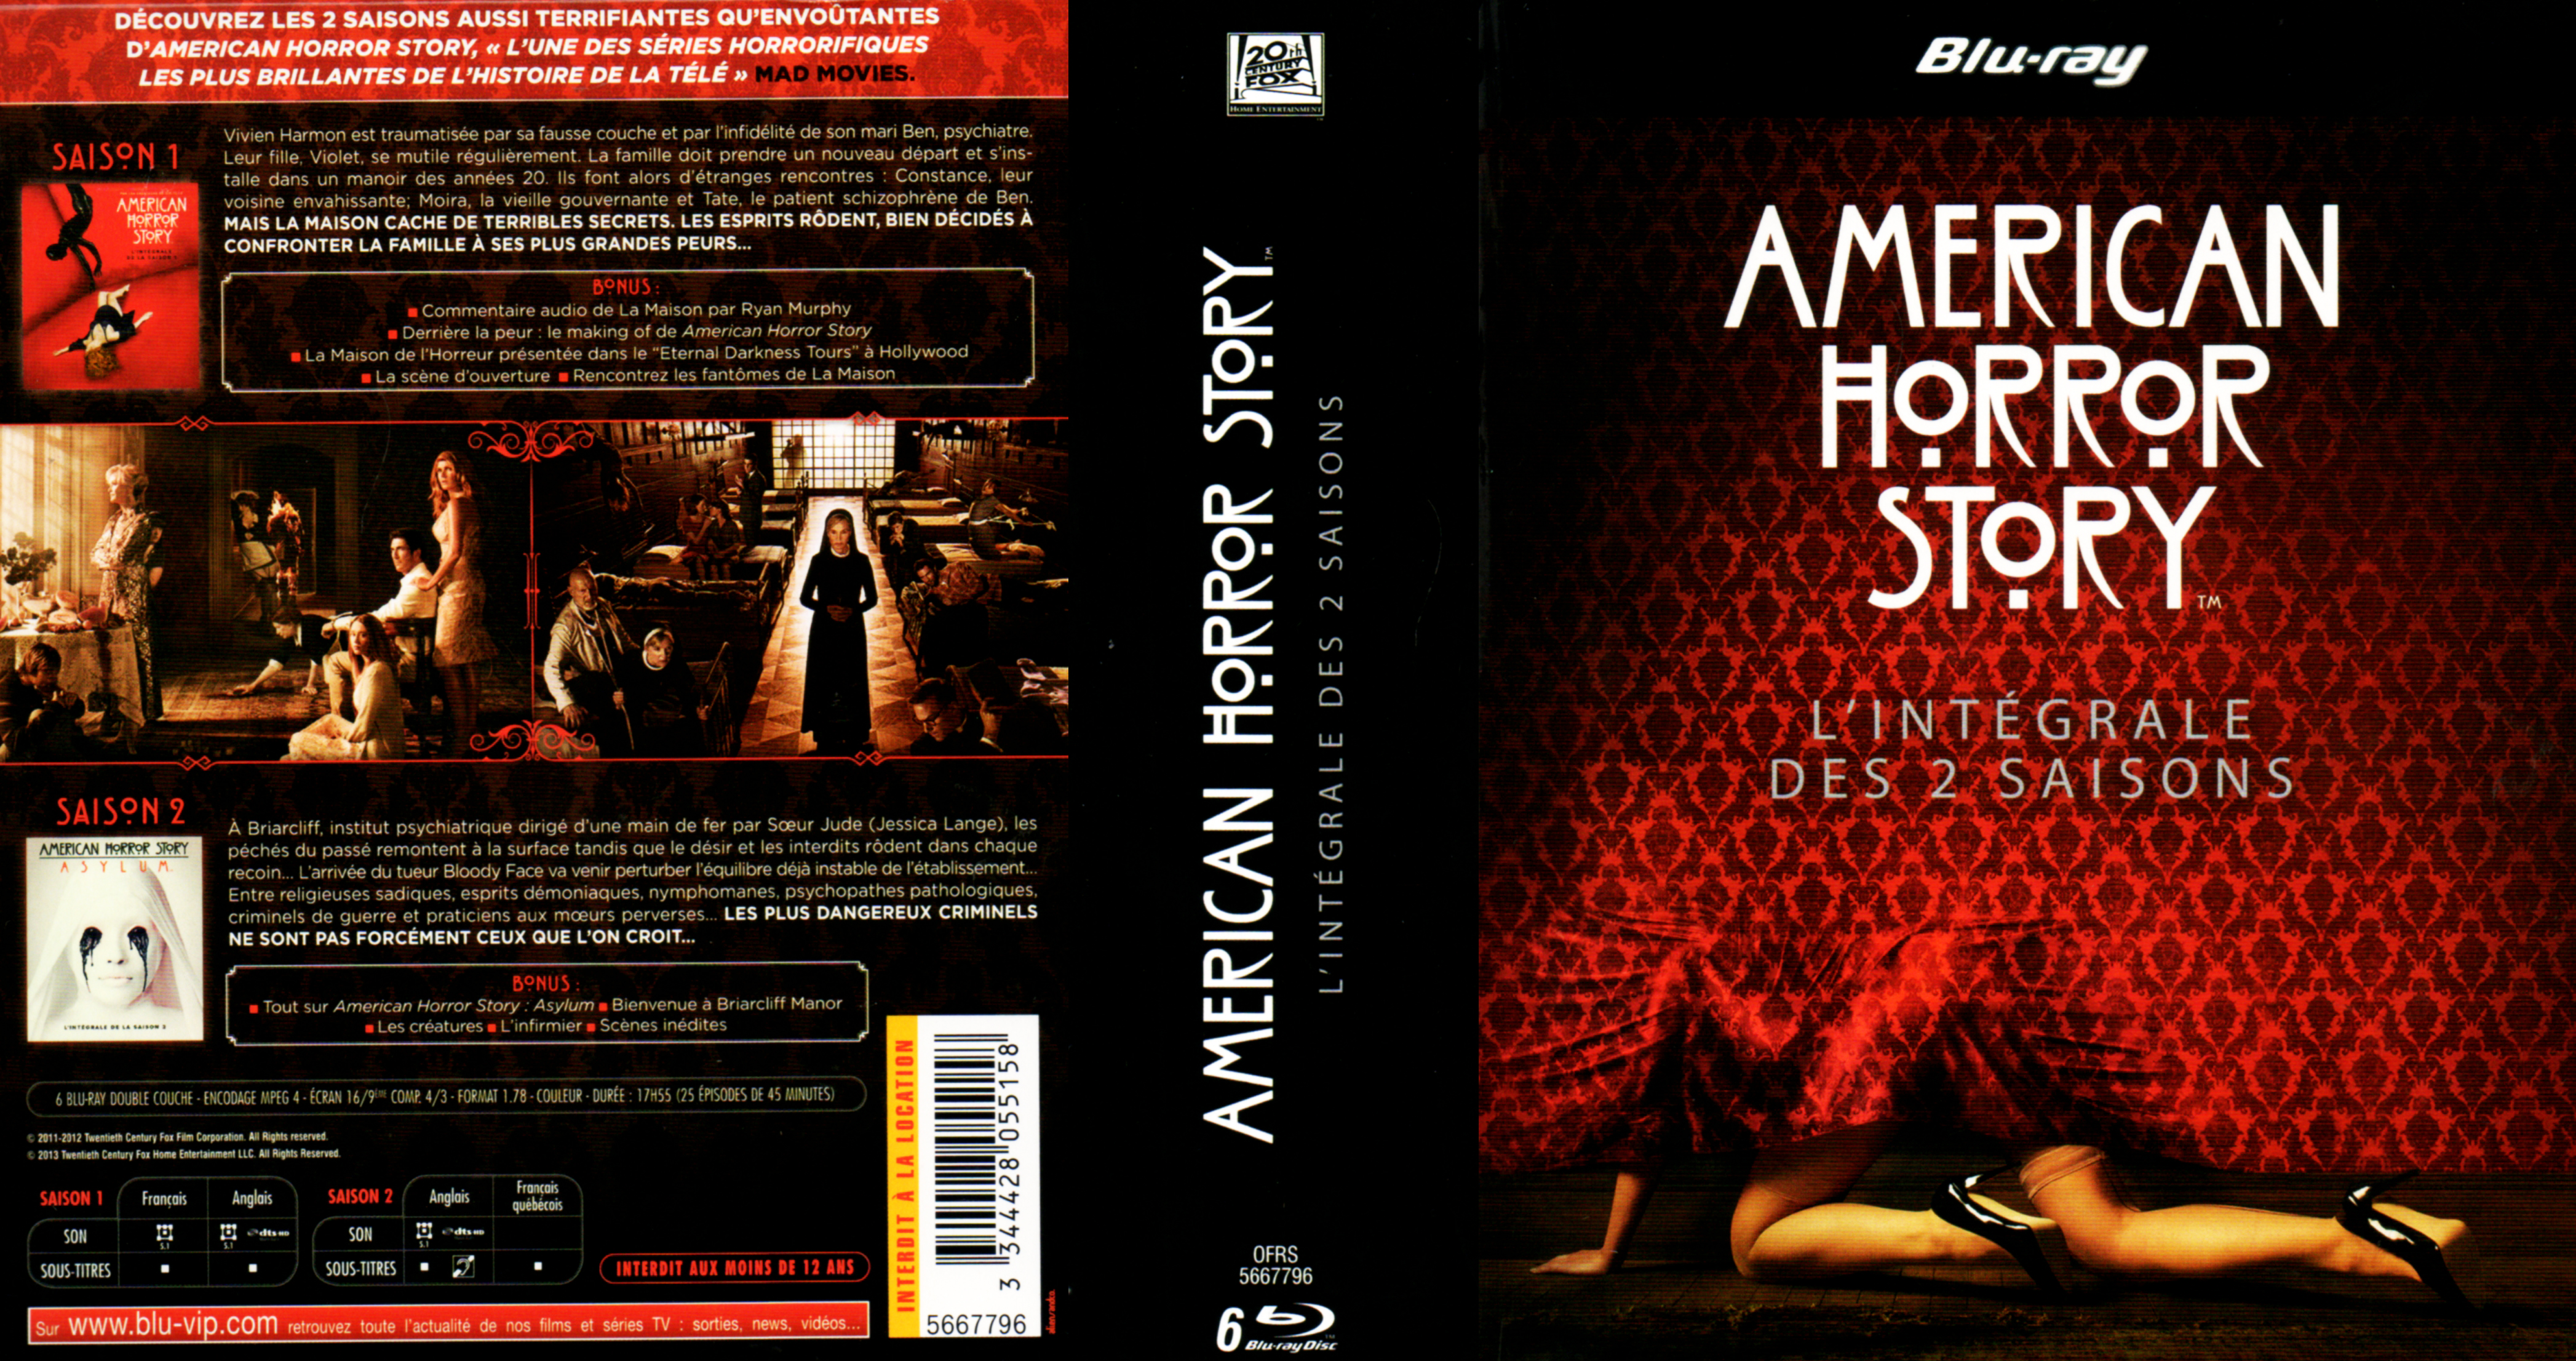 Jaquette DVD American horror story Intégrale 2 Saisons (BLU-RAY) .